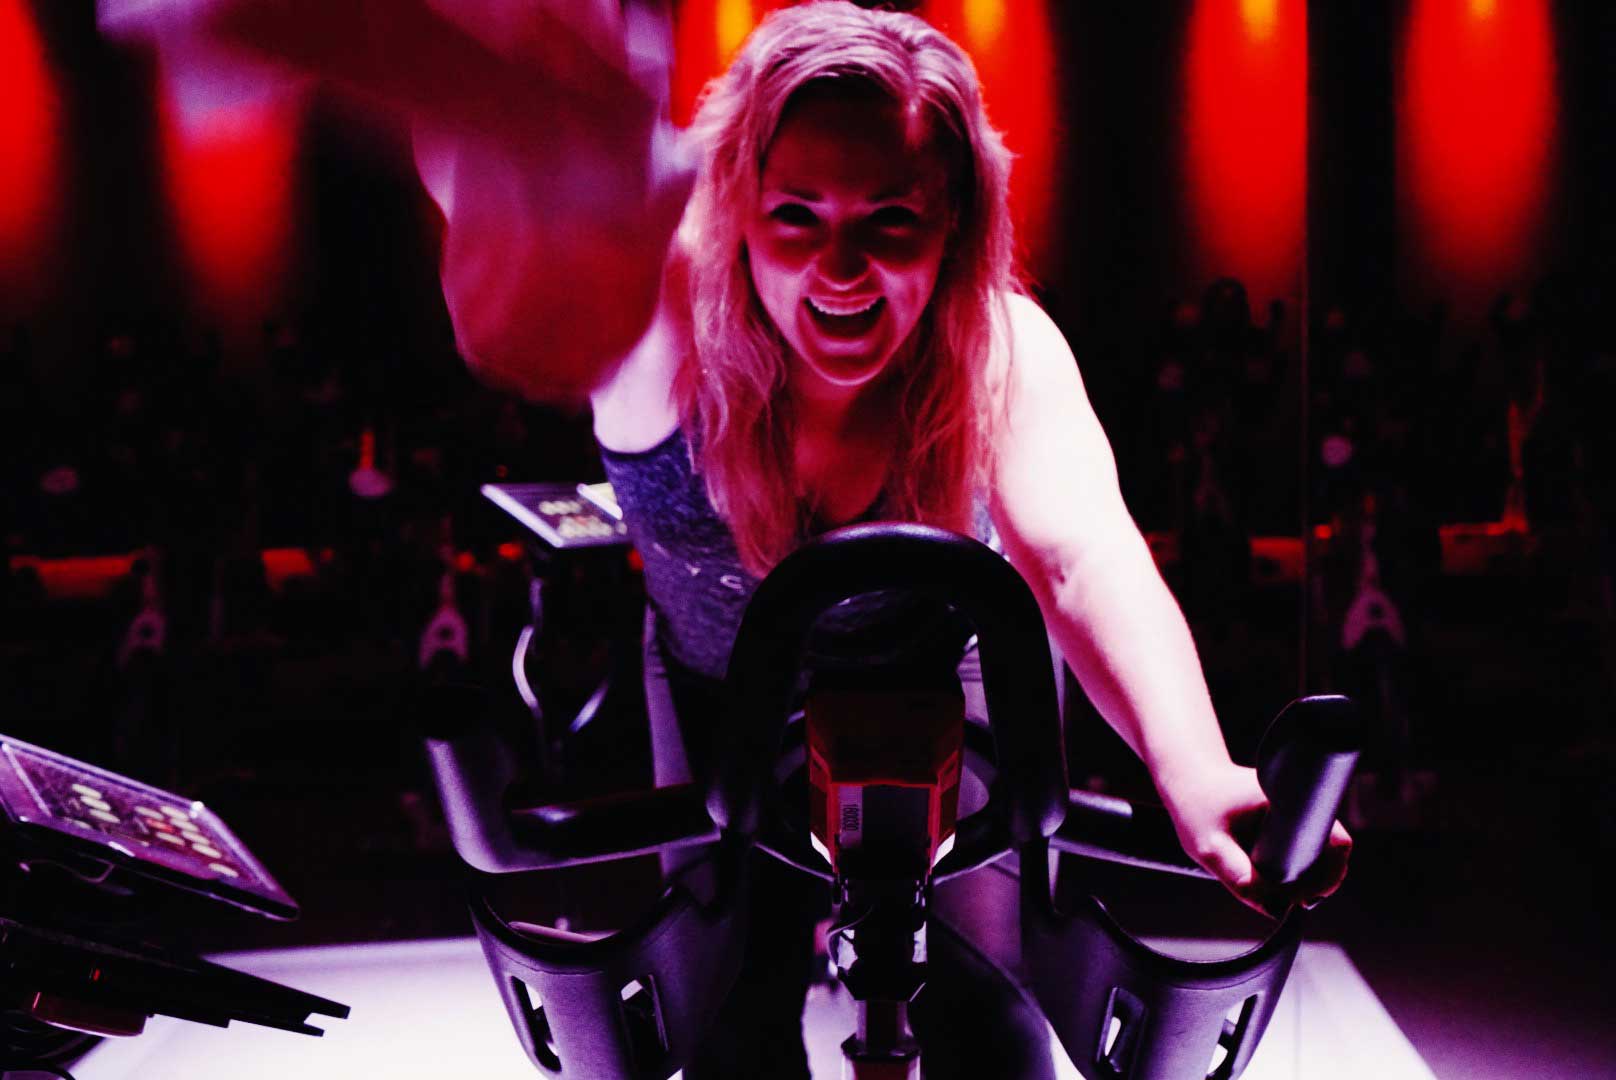 Woman takes Cyclebar class to get in shape for your wedding